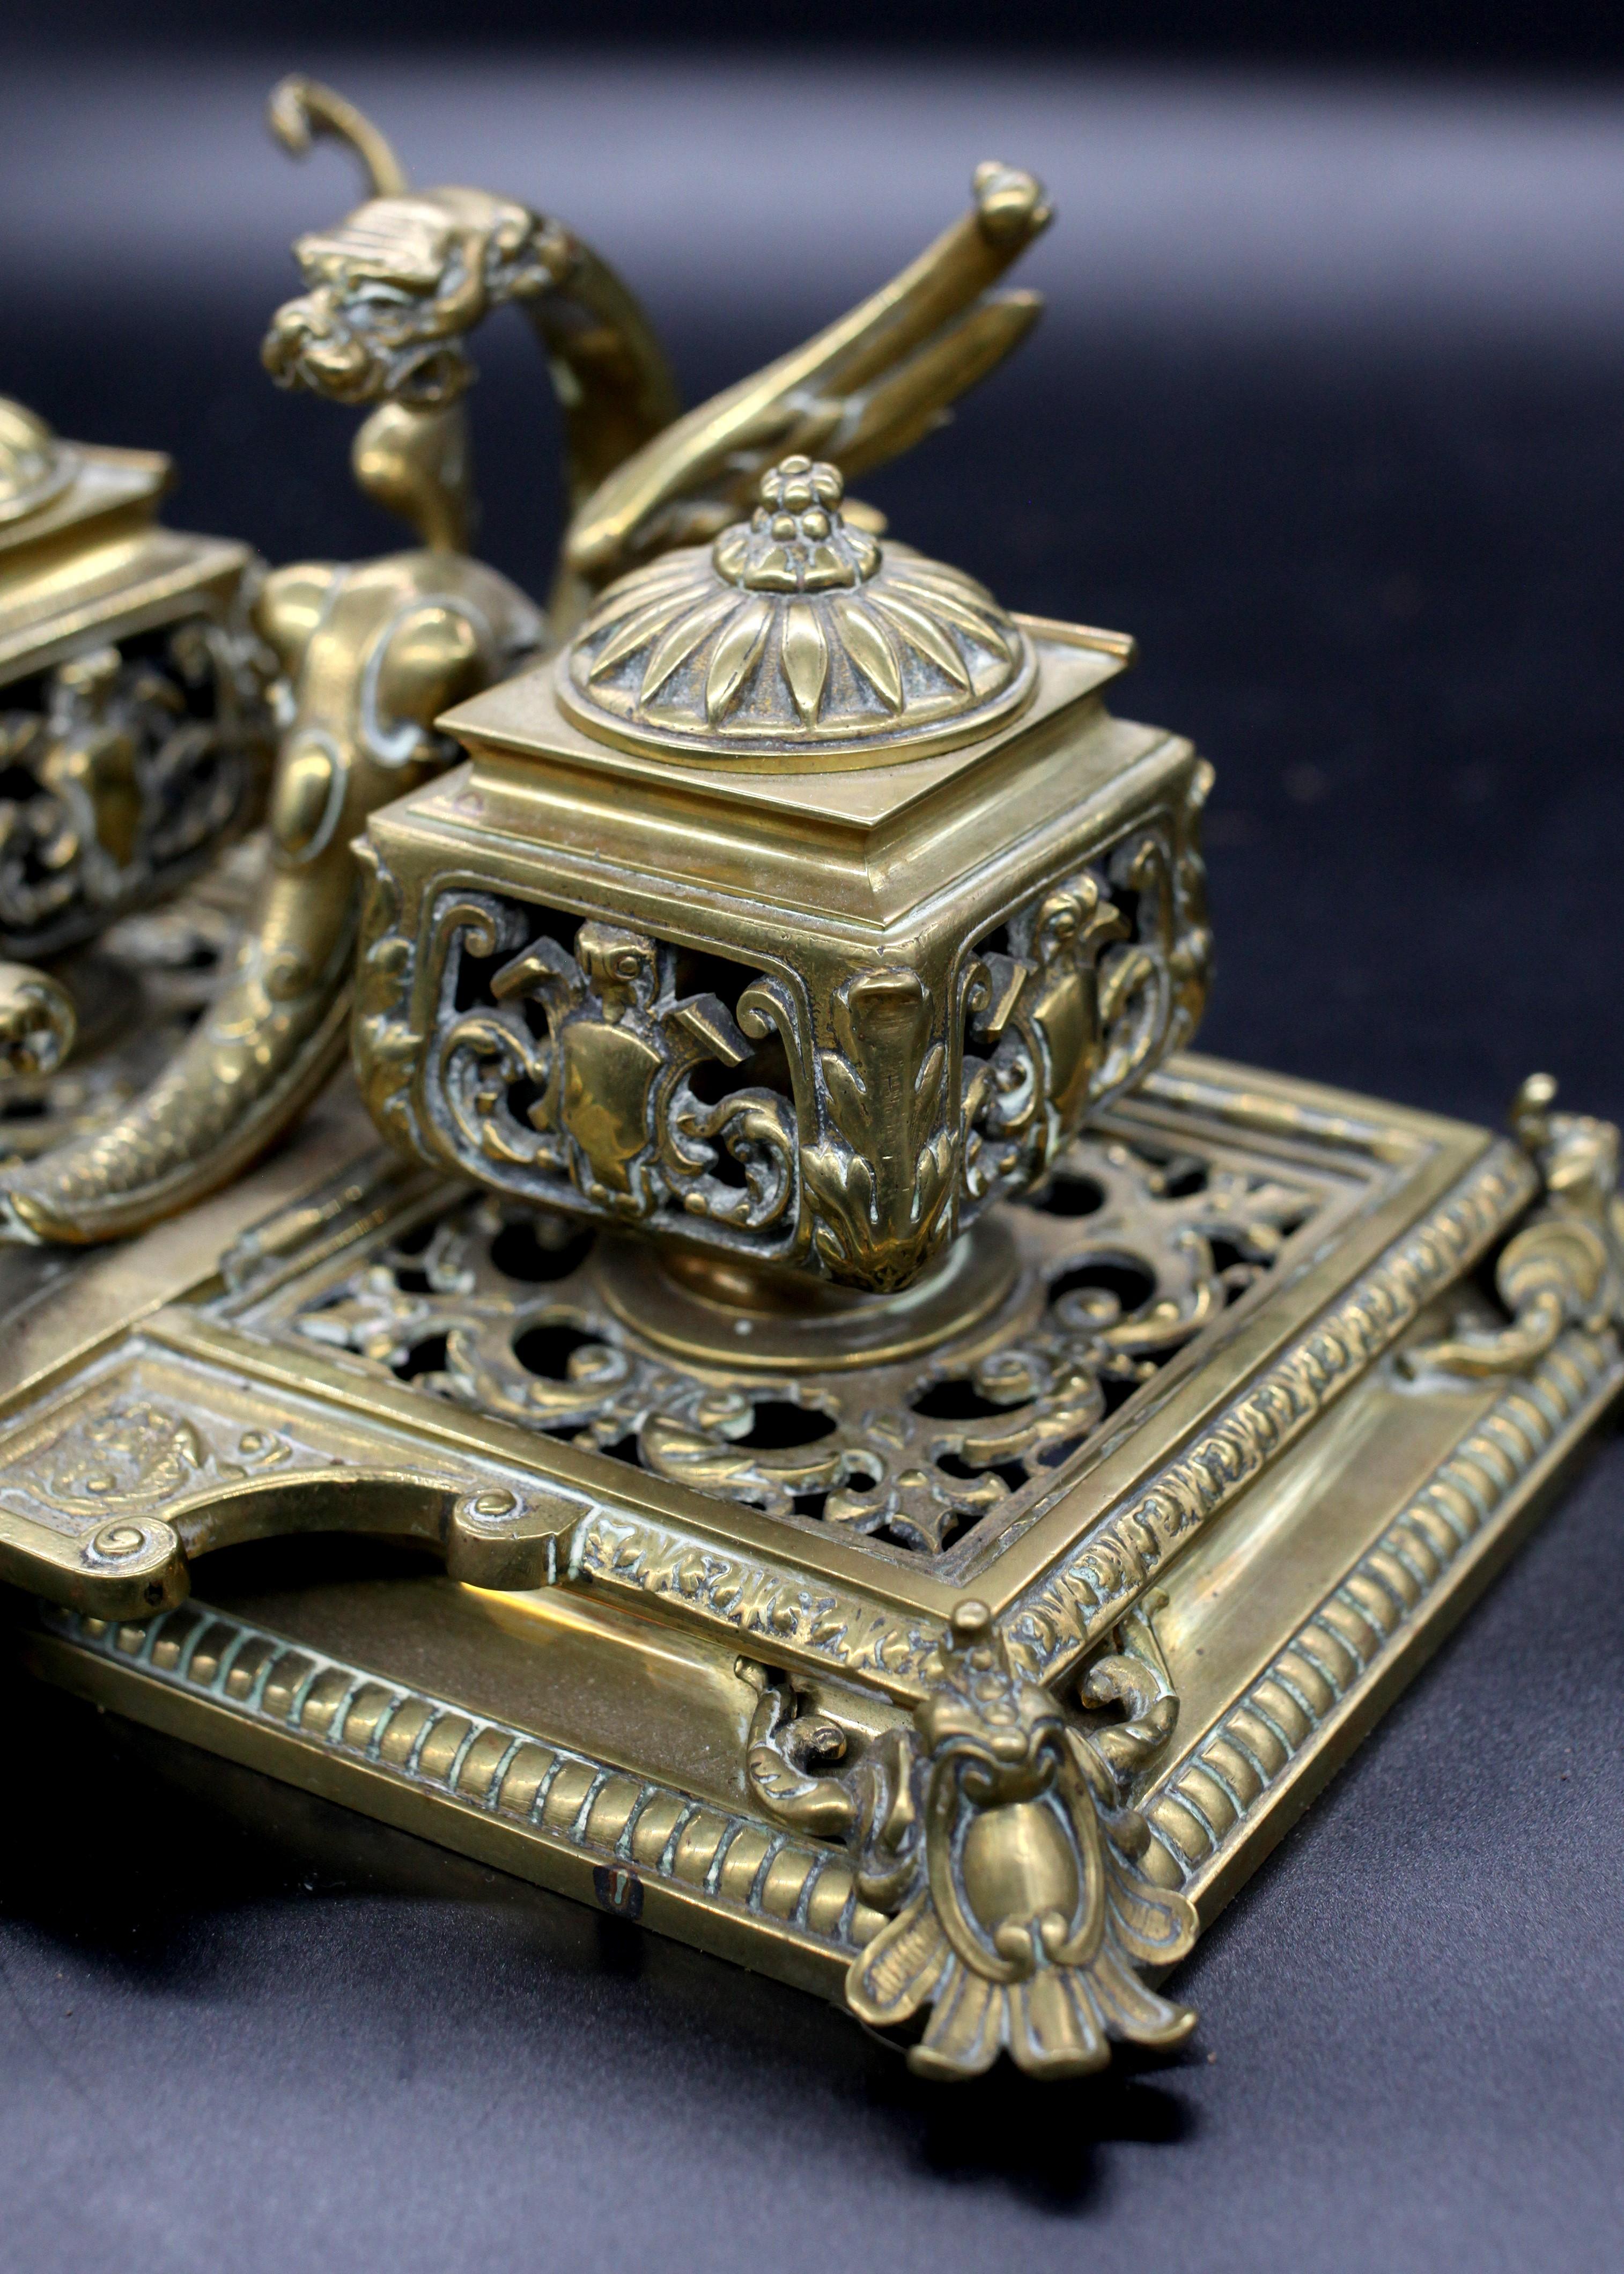 A bewitching blend of form and function, this late 19th-century English Victorian Brass Double Inkwell Desk Stand is a splendid testament to the Victorian era's affinity for detail and grandeur. The stand, carefully crafted from brass, features a